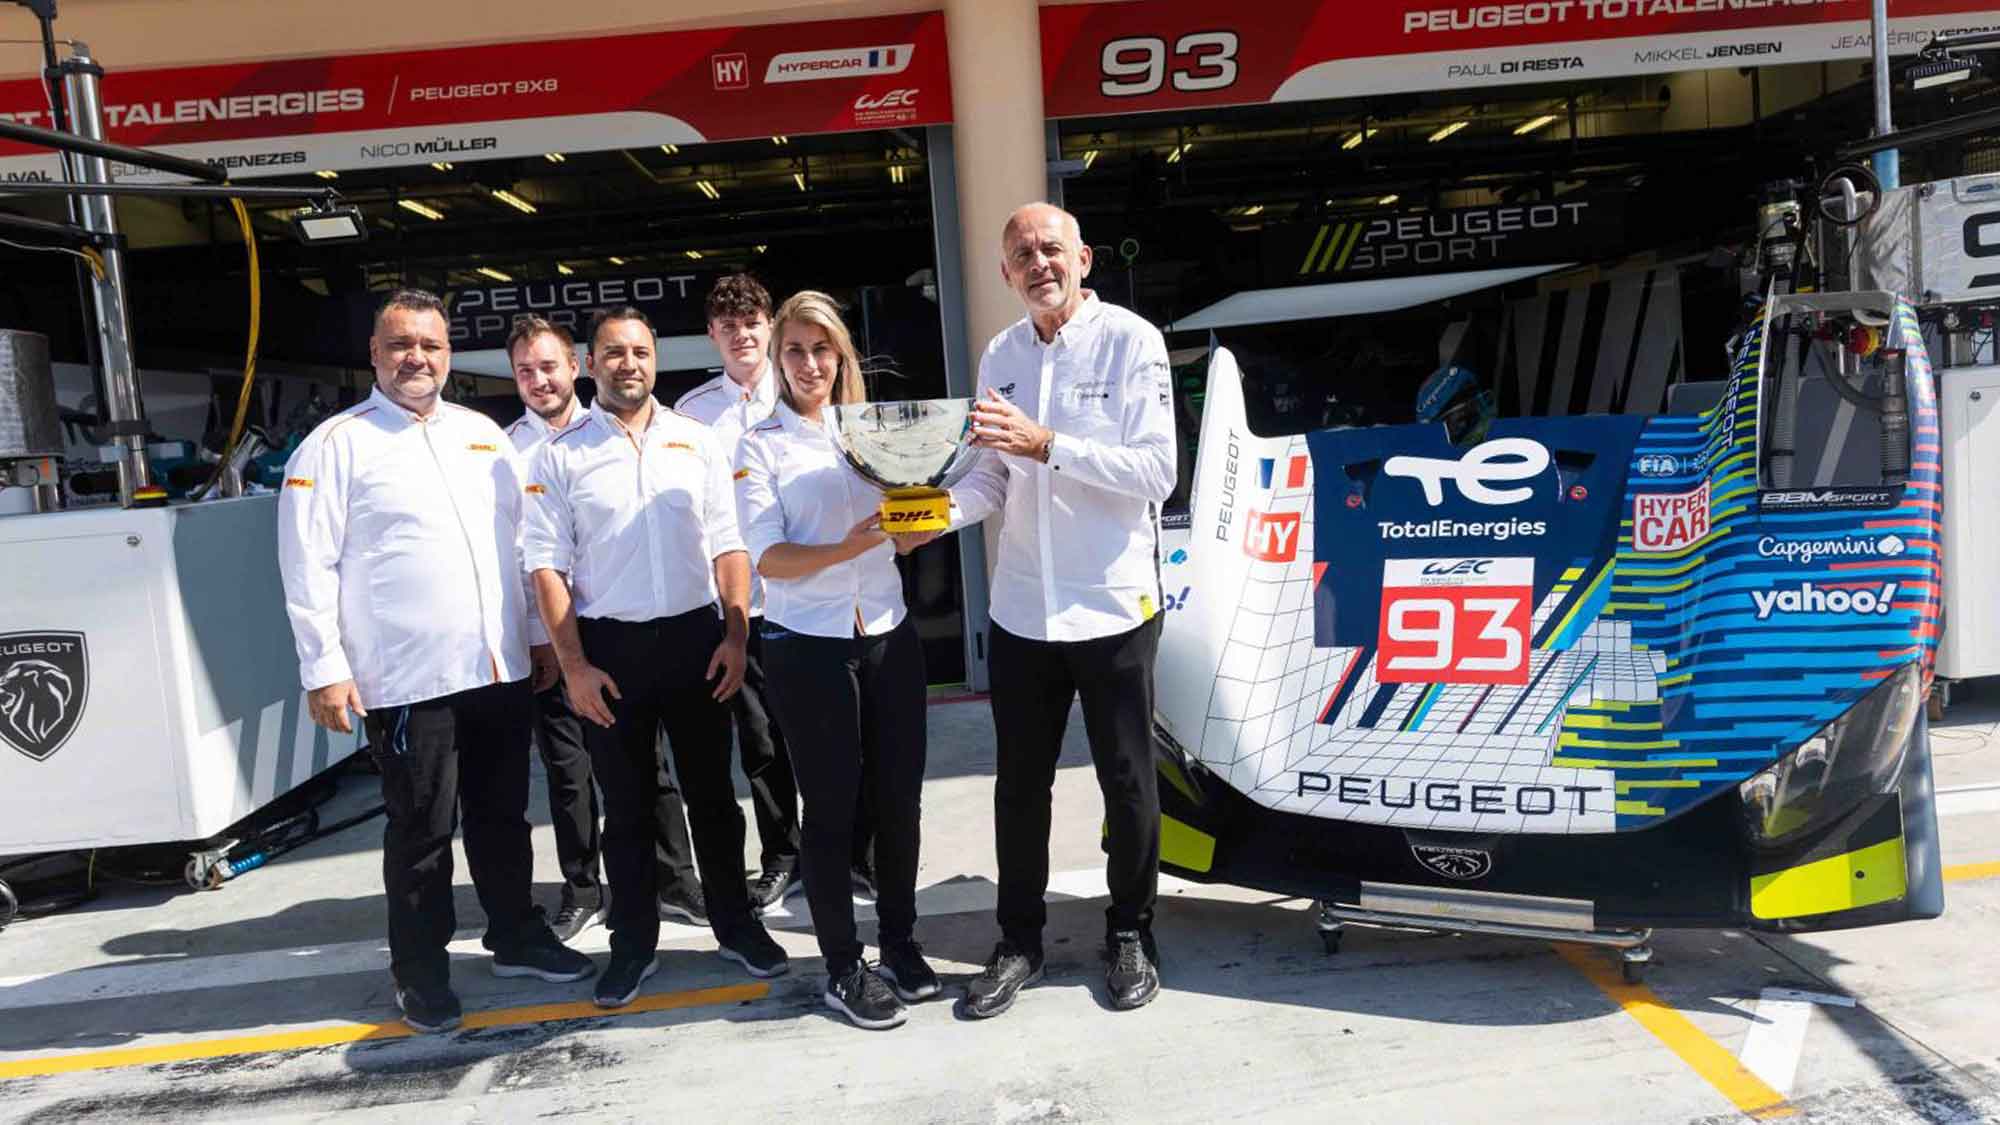 Team Peugeot »TotalEnergies« won the FIA WEC and ACO Low Carbon Impact Award